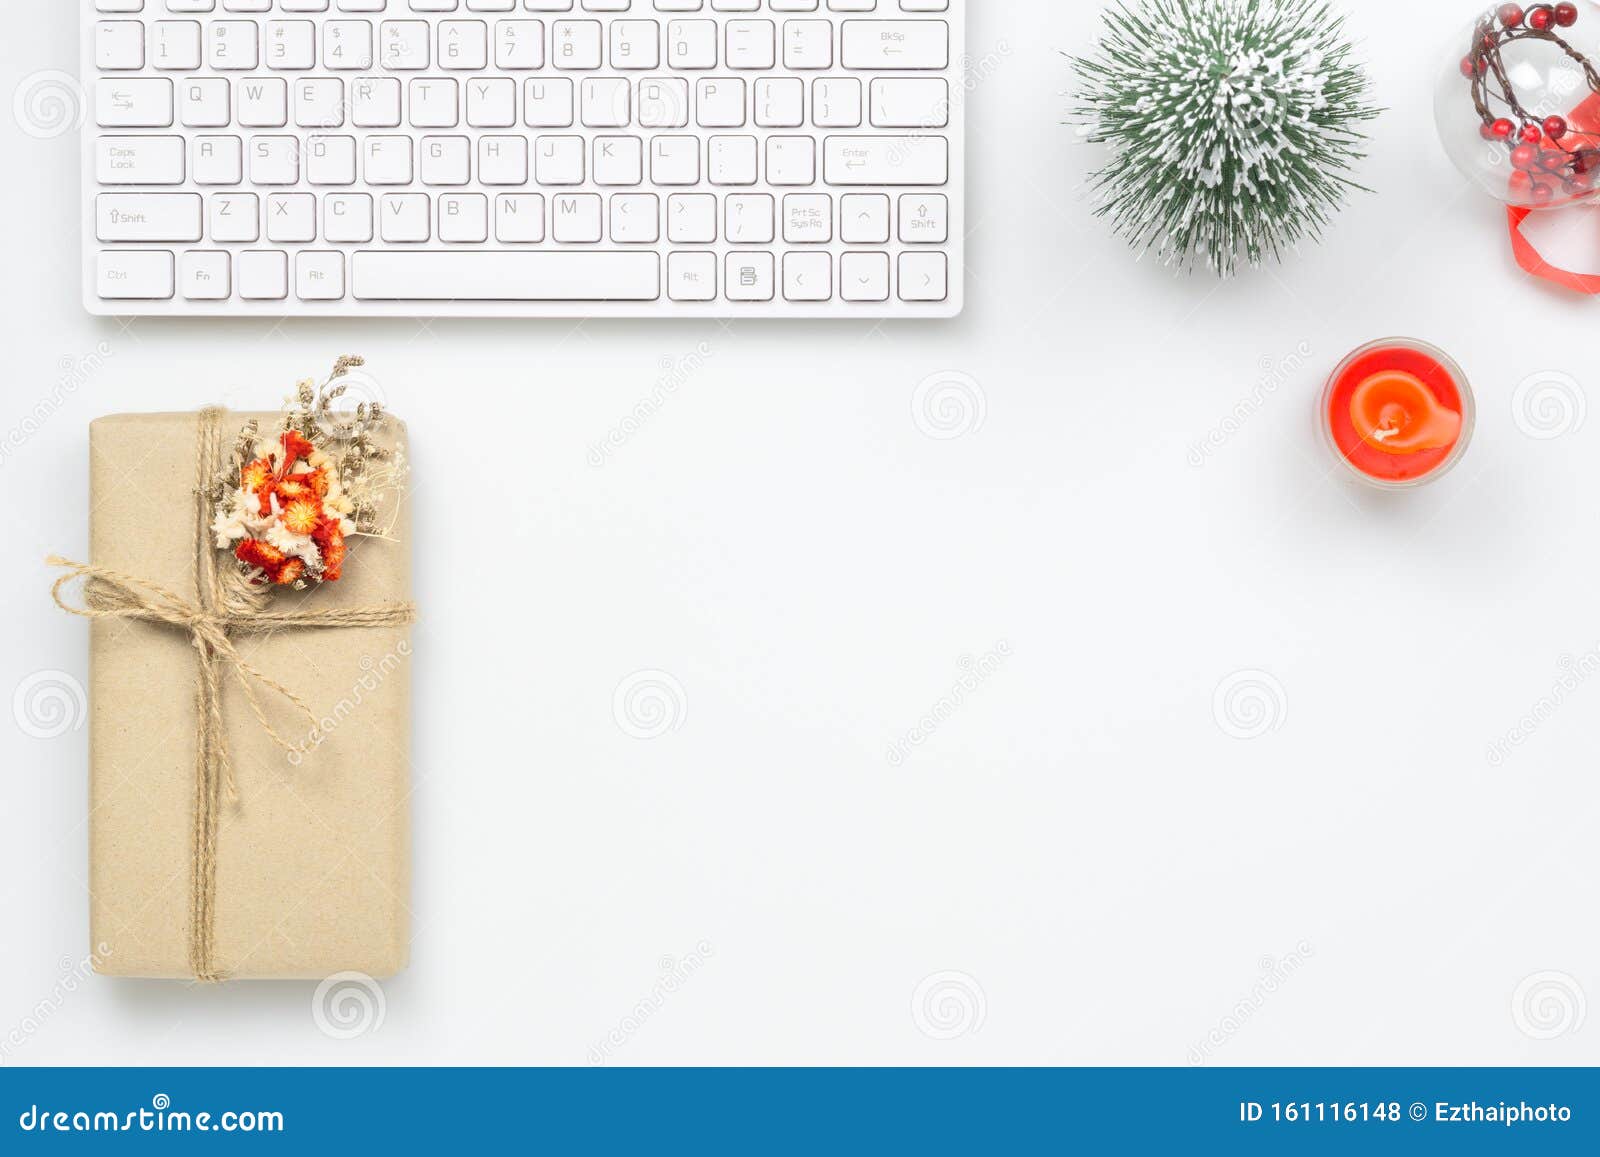 Merry Christmas and Happy New Years Office Work Space Desktop Concept. Flat  Lay Top View with Keyboard, Natural Gift Box and Stock Photo - Image of  laptop, background: 161116148